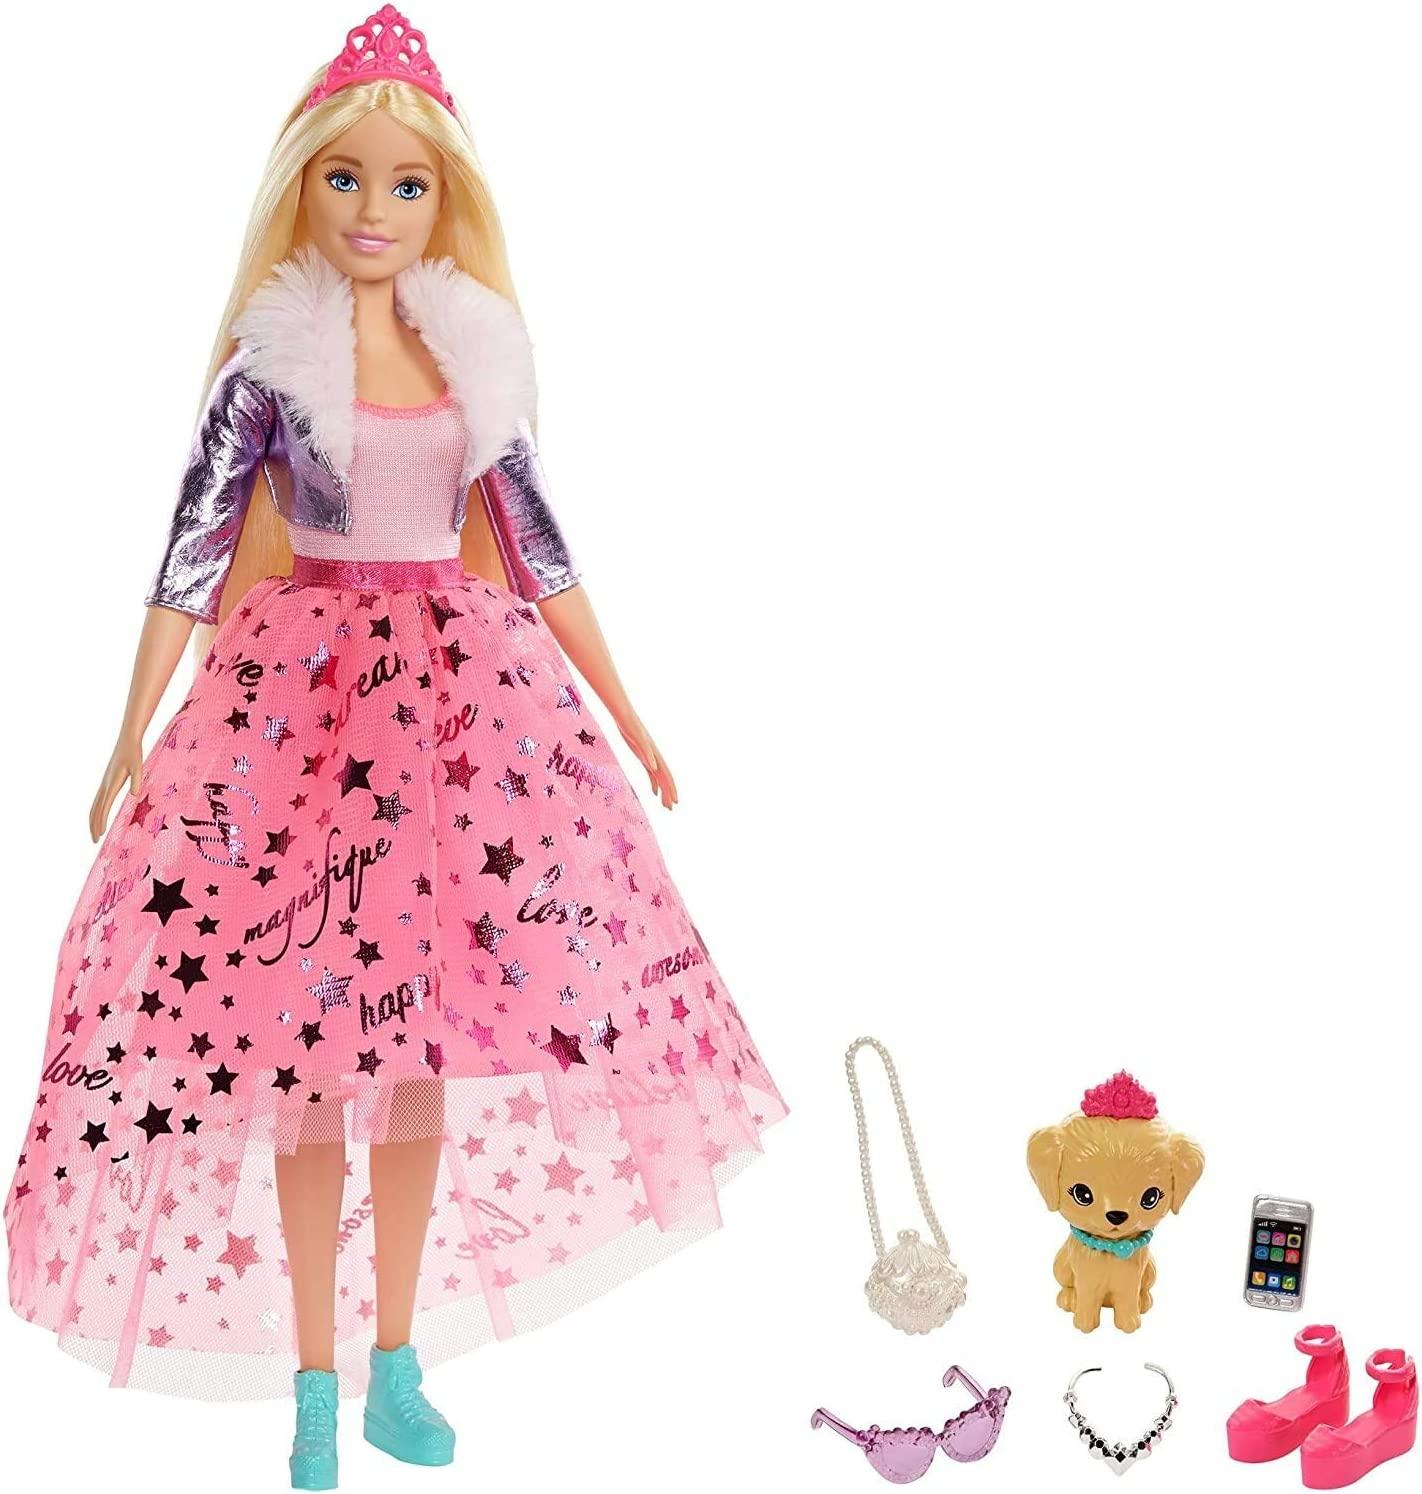 Barbie Princess Adventure Doll in Princess Fashion (12-in Blonde) Barbie Doll with Pet Puppy, 2 Pairs of Shoes, Tiara and 4 Accessories, for 3 to 7 Year Olds